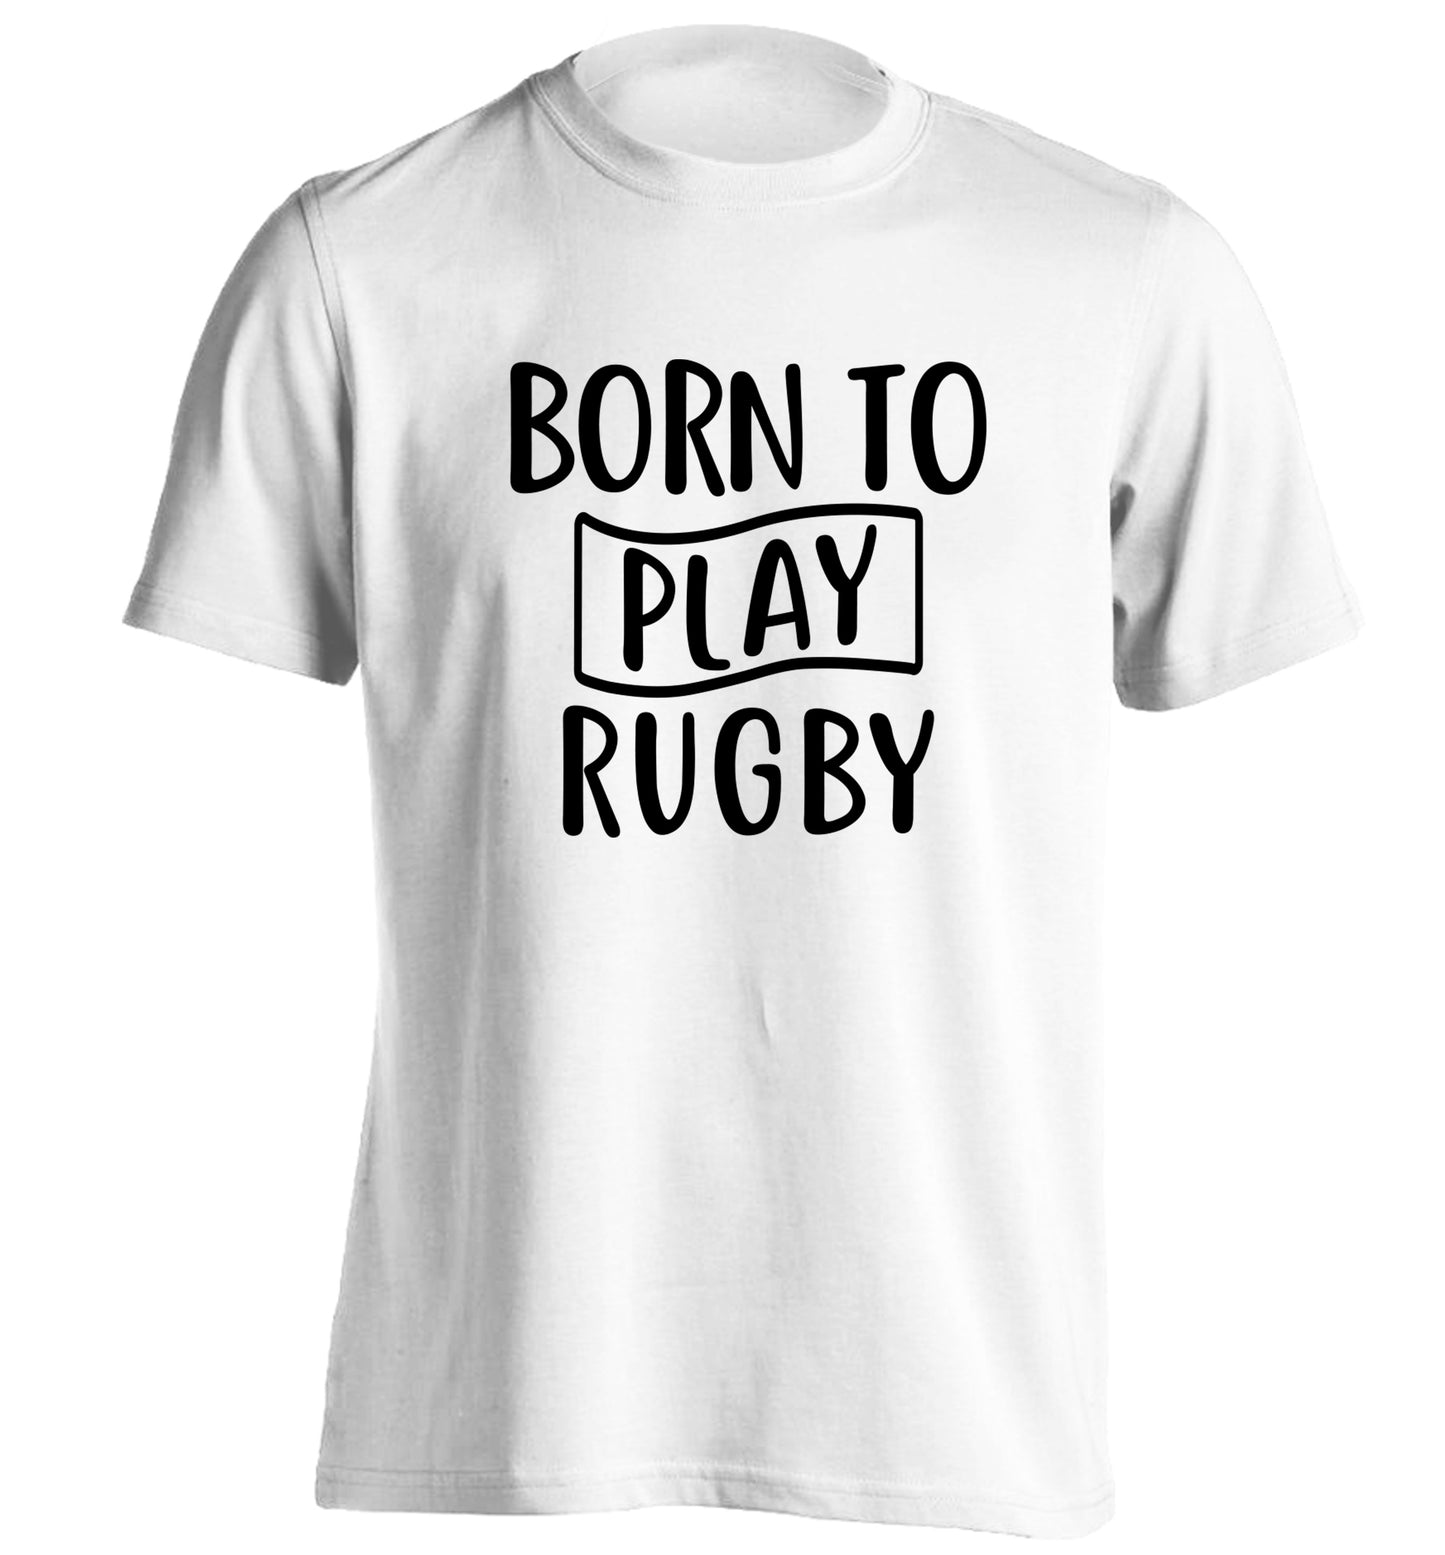 Born to play rugby adults unisex white Tshirt 2XL